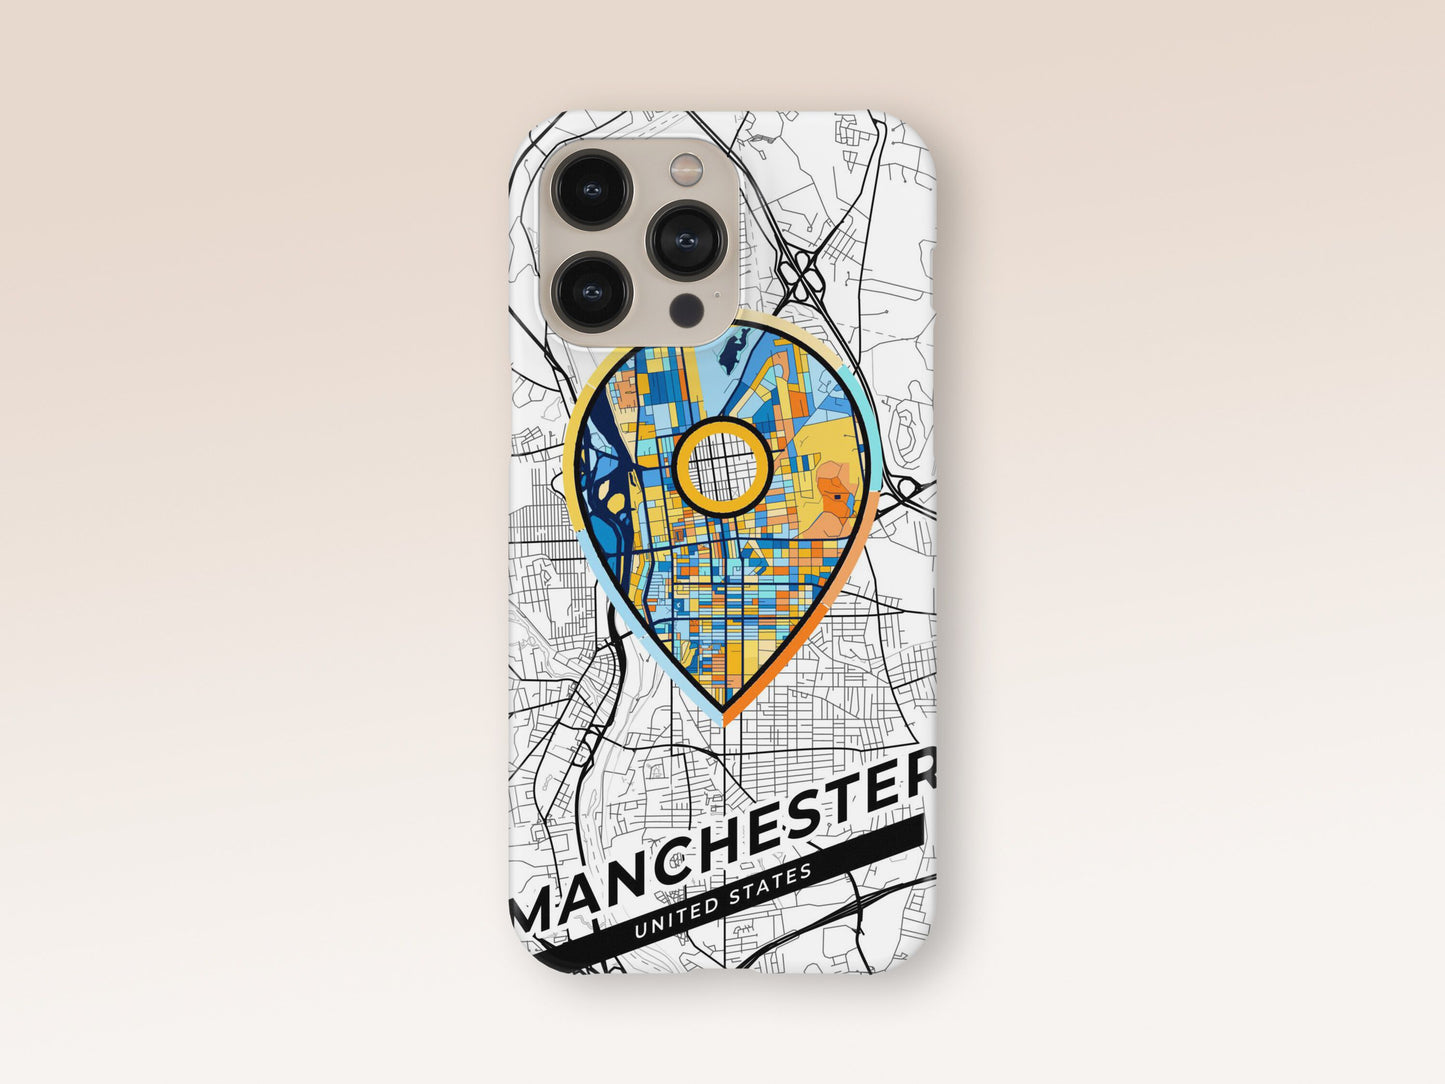 Manchester New Hampshire slim phone case with colorful icon. Birthday, wedding or housewarming gift. Couple match cases. 1